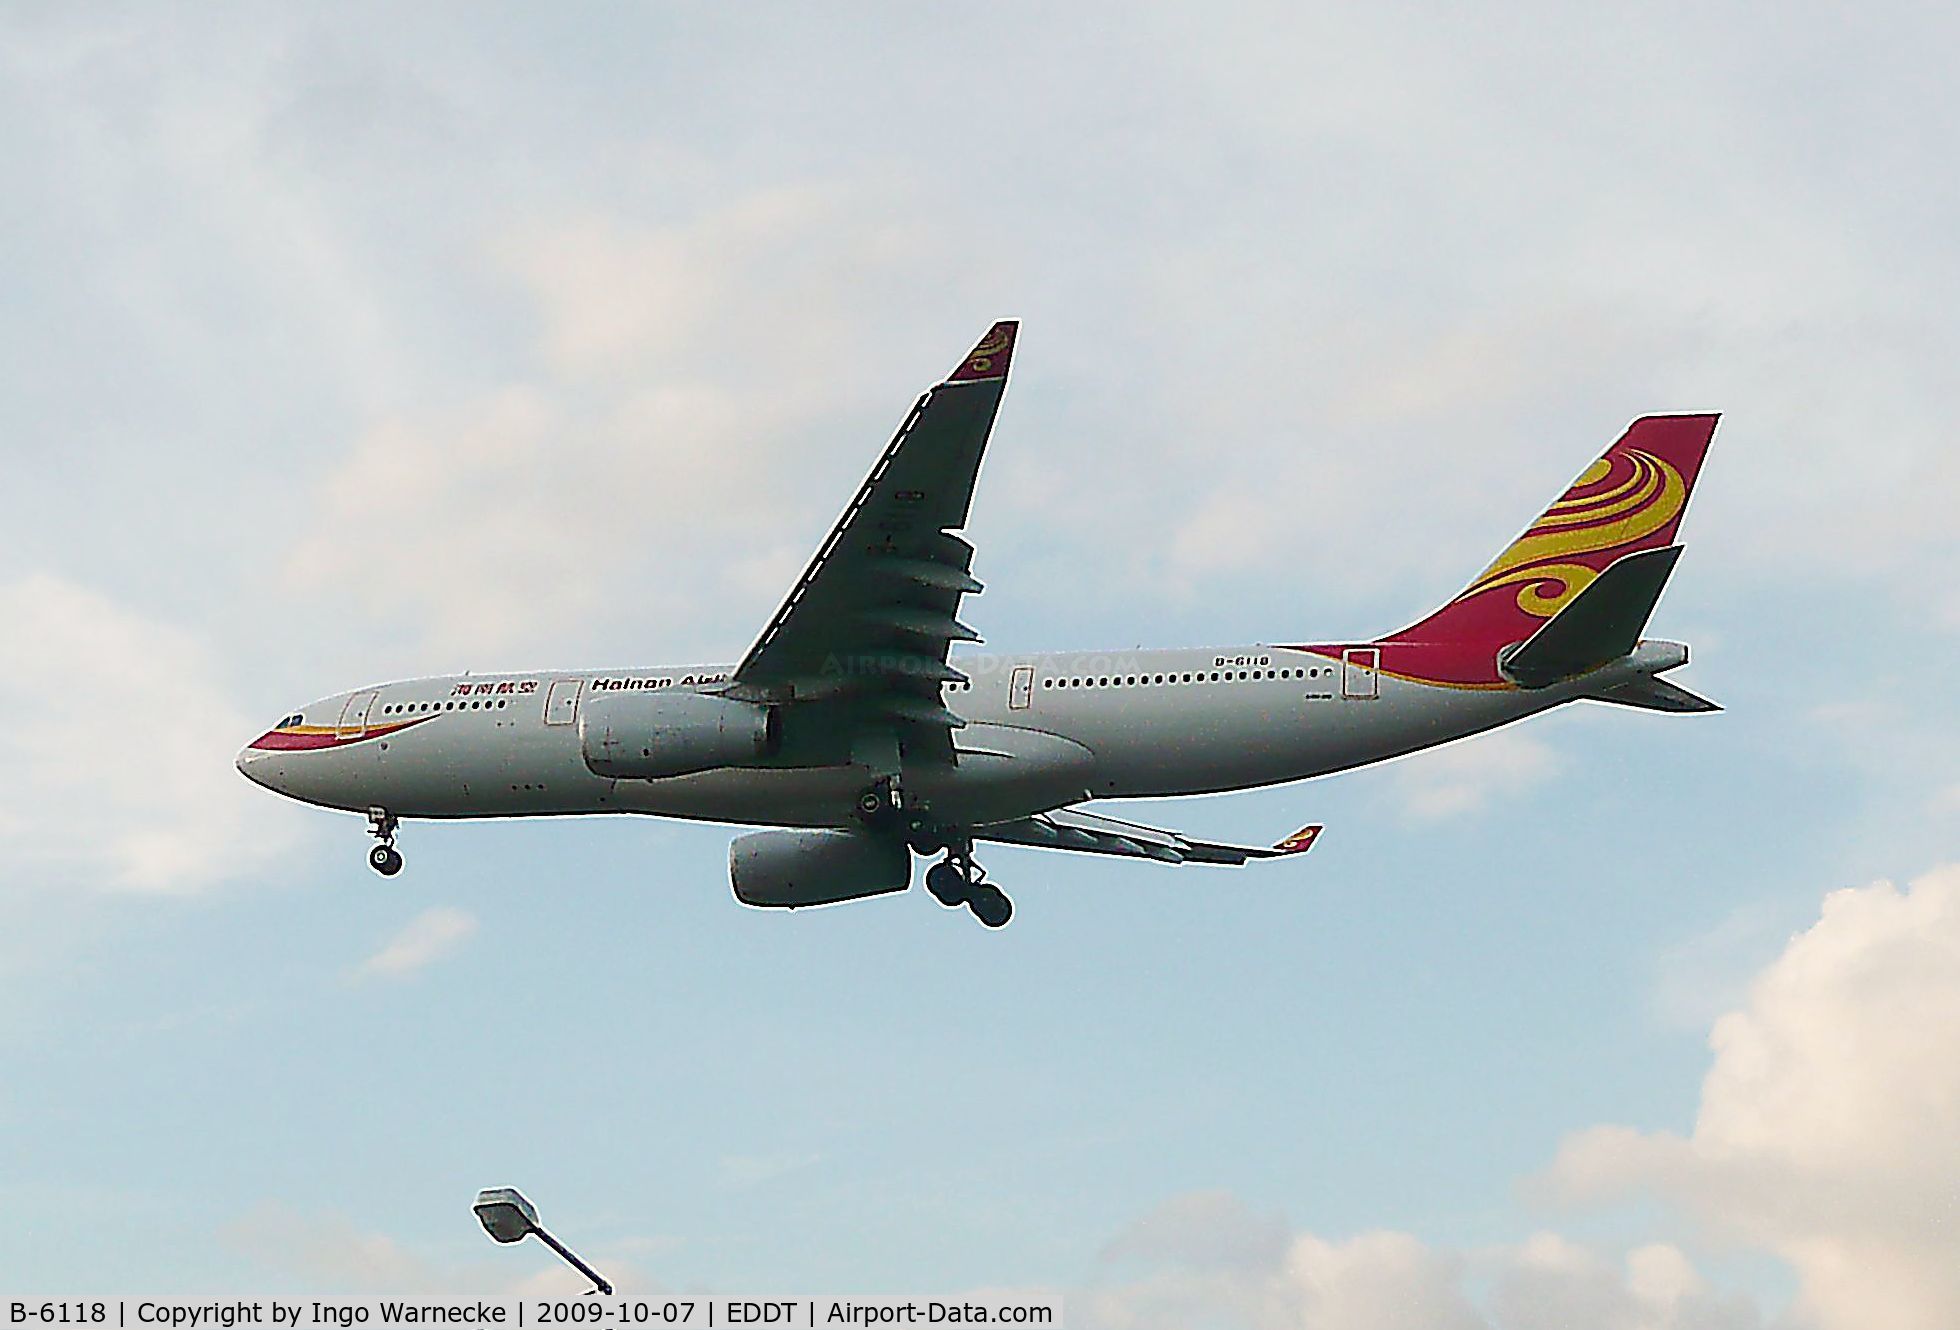 B-6118, 2007 Airbus A330-243 C/N 881, Airbus A330-243 of Hainan Airlies on final approach into Tegel airport